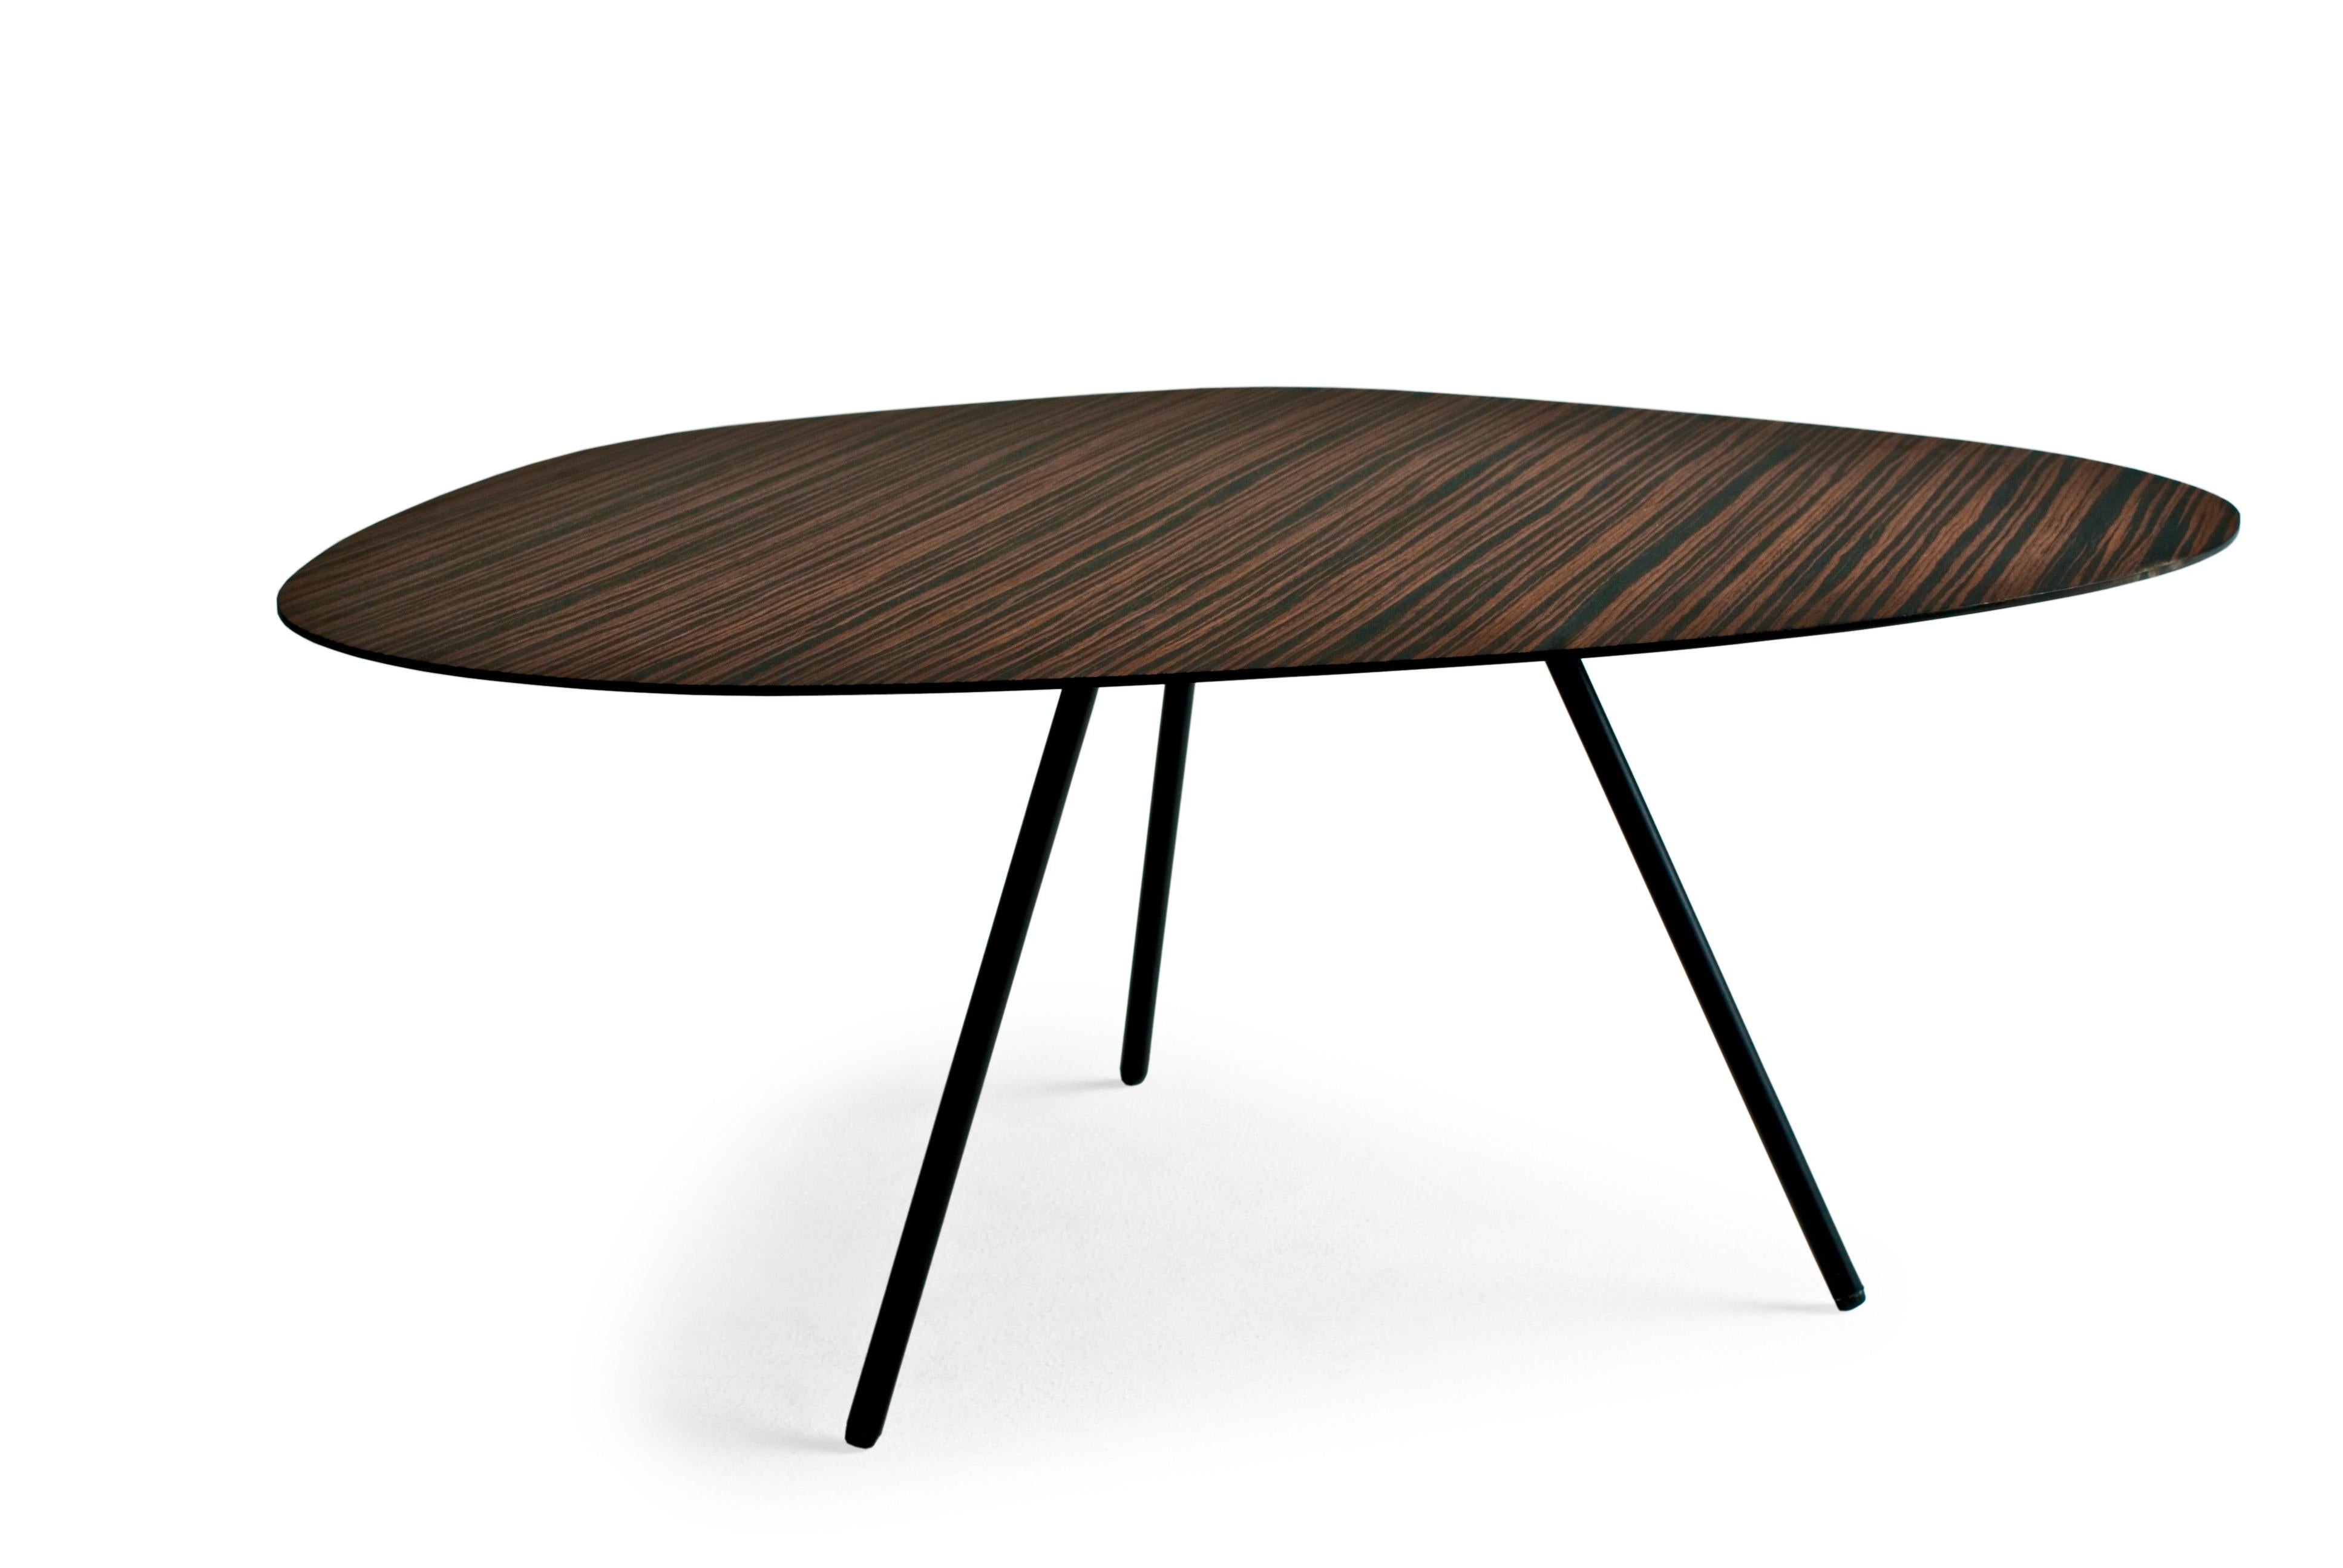 Black Medium Pebble coffee table by Kenneth Cobonpue.
Materials: Black, sapele, steel. 
Also available in other colors and for outdoors.
Dimensions: 53 cm x 71 cm x H 30 cm 

Pebble playfully echoes shapes found in nature like stepping-stones